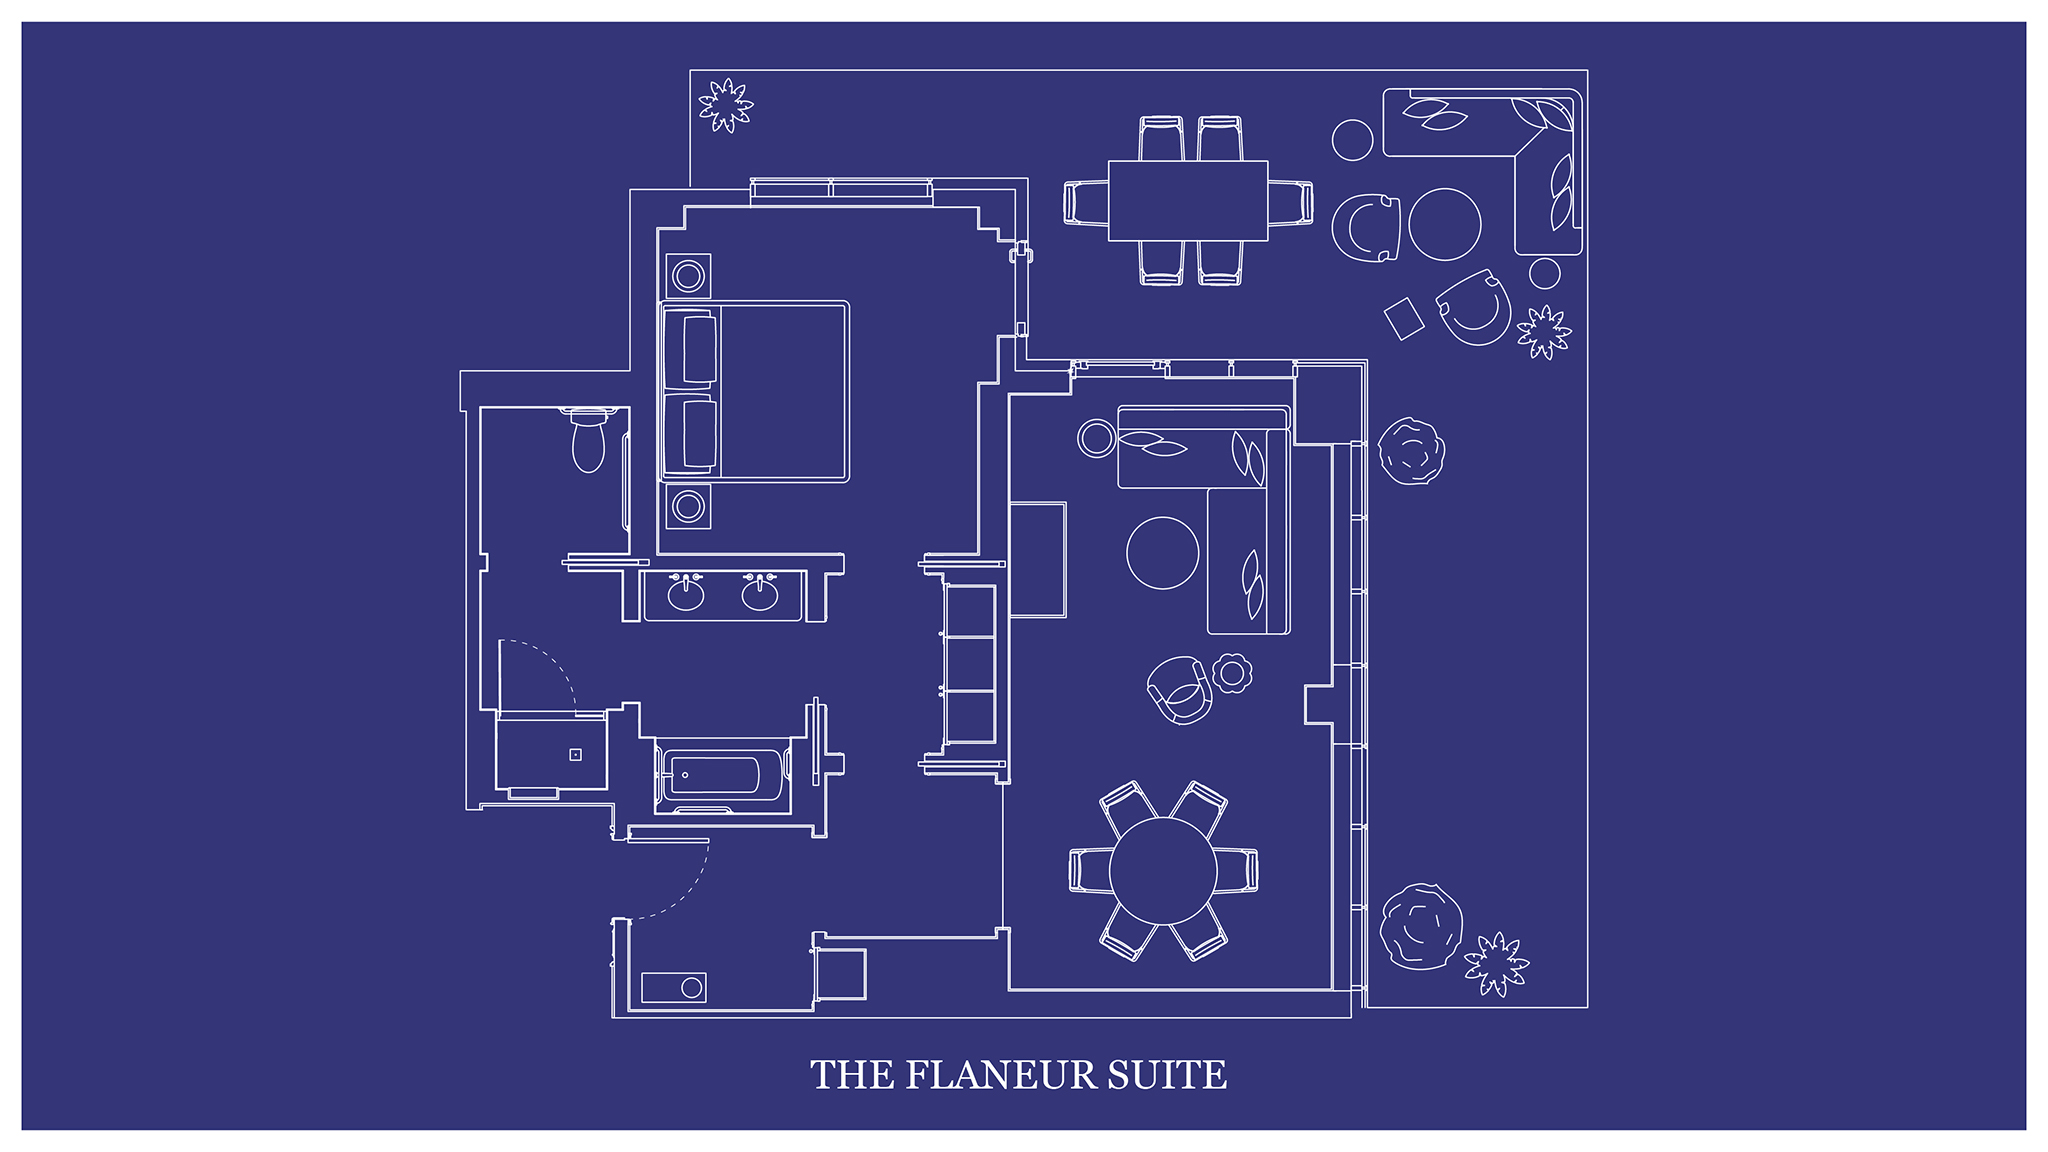 Blueprint map of "THE FLANEUR SUITE" rendered in intricate detail and design.